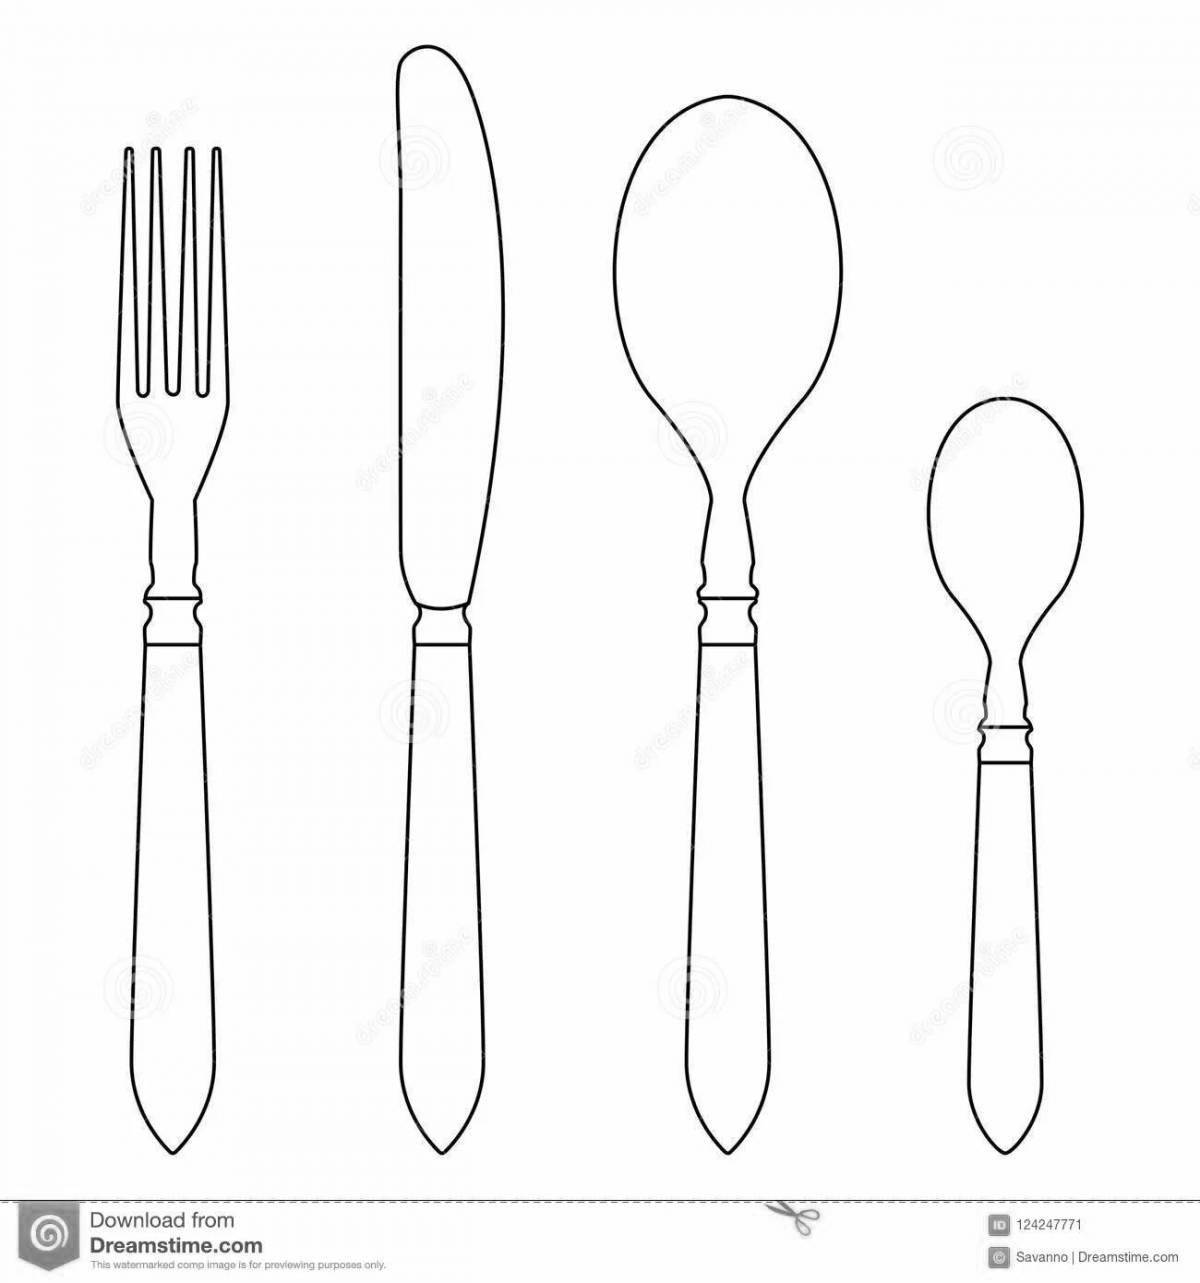 Cheerful cutlery coloring for babies